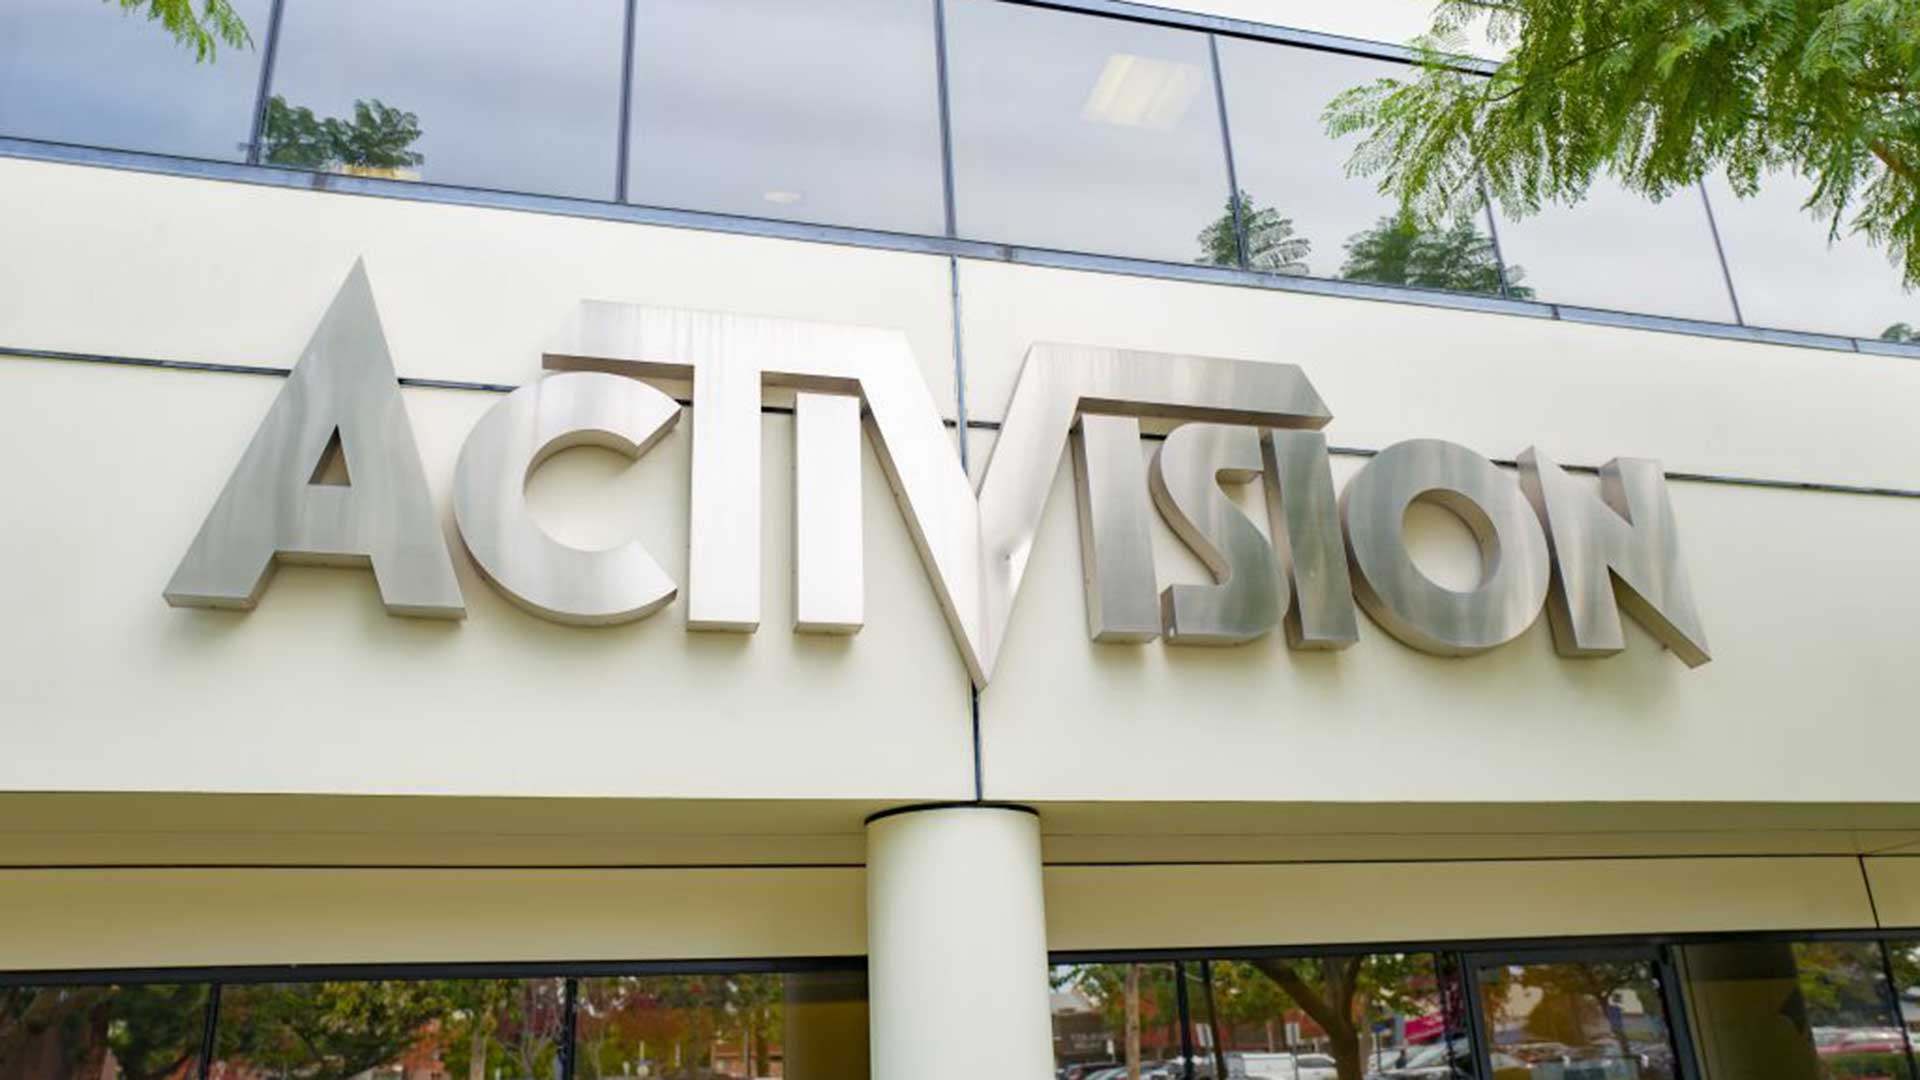 Activision Blizzard will be delisted from Nasdaq to finalize its